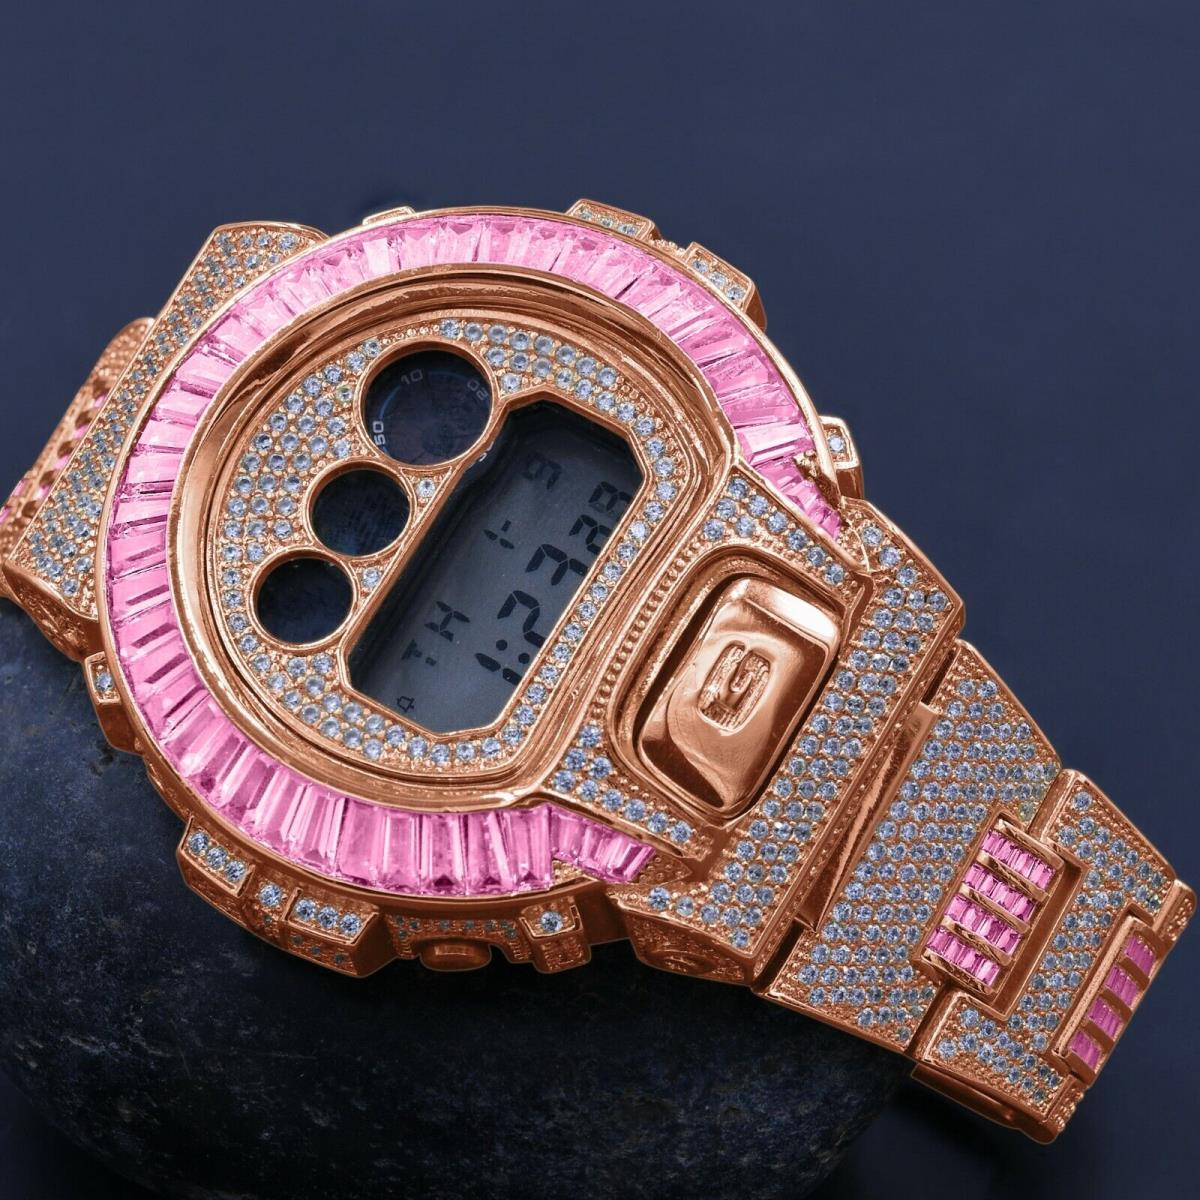 Icy Baguette Soft Baby Pink Rose Gold Casio G-shock DW-6900 Watch